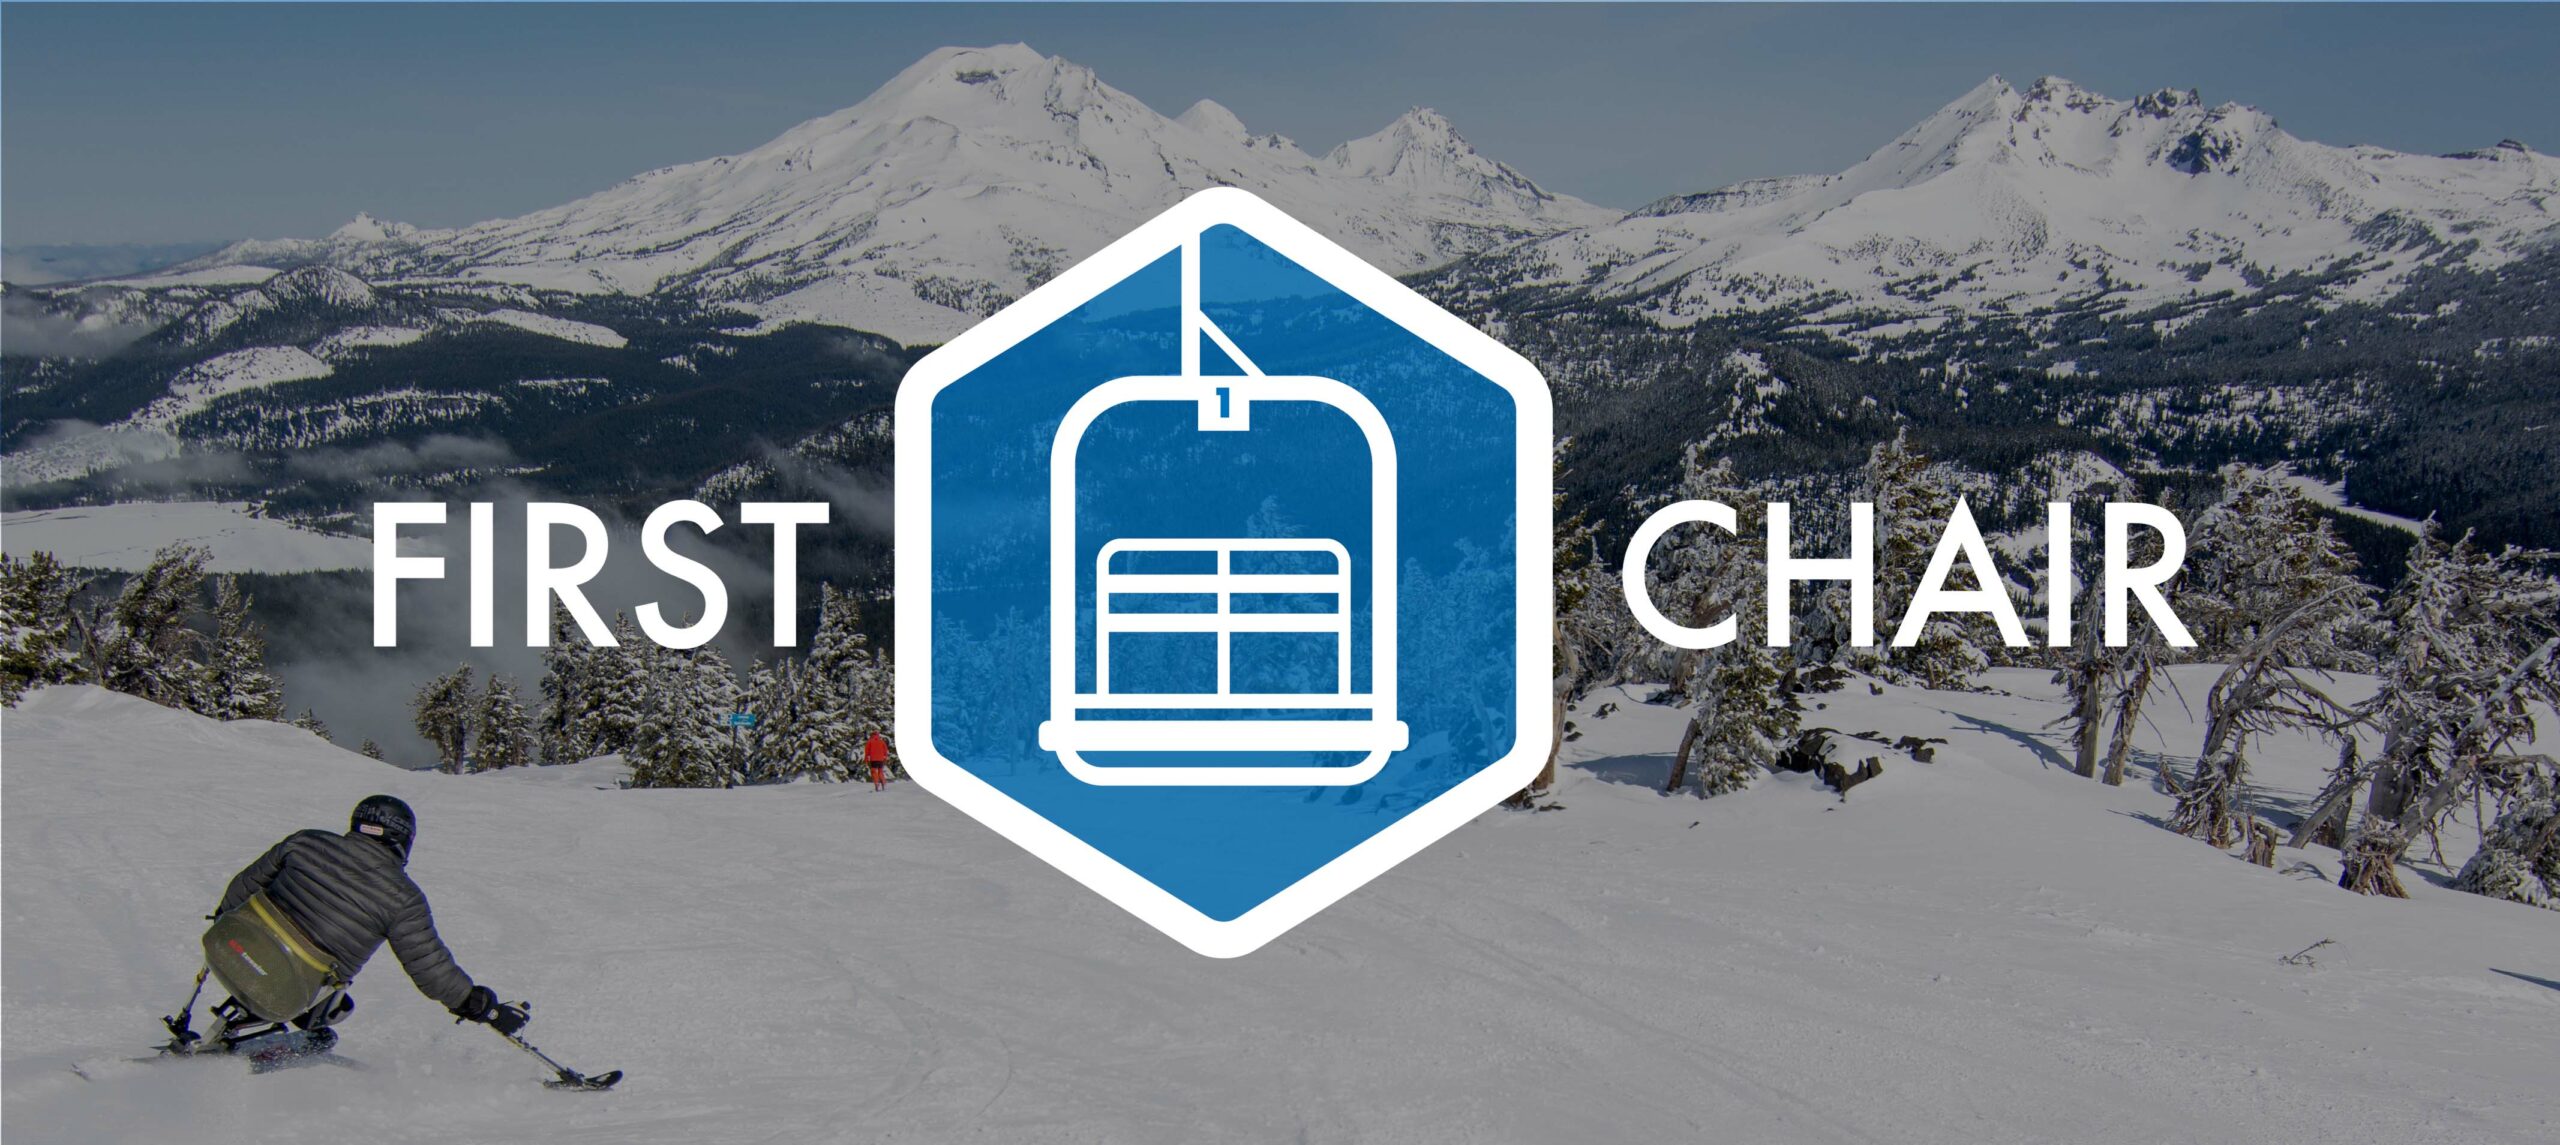 First Chair event logo superimposed over a sit skier skiing on mt bachelor